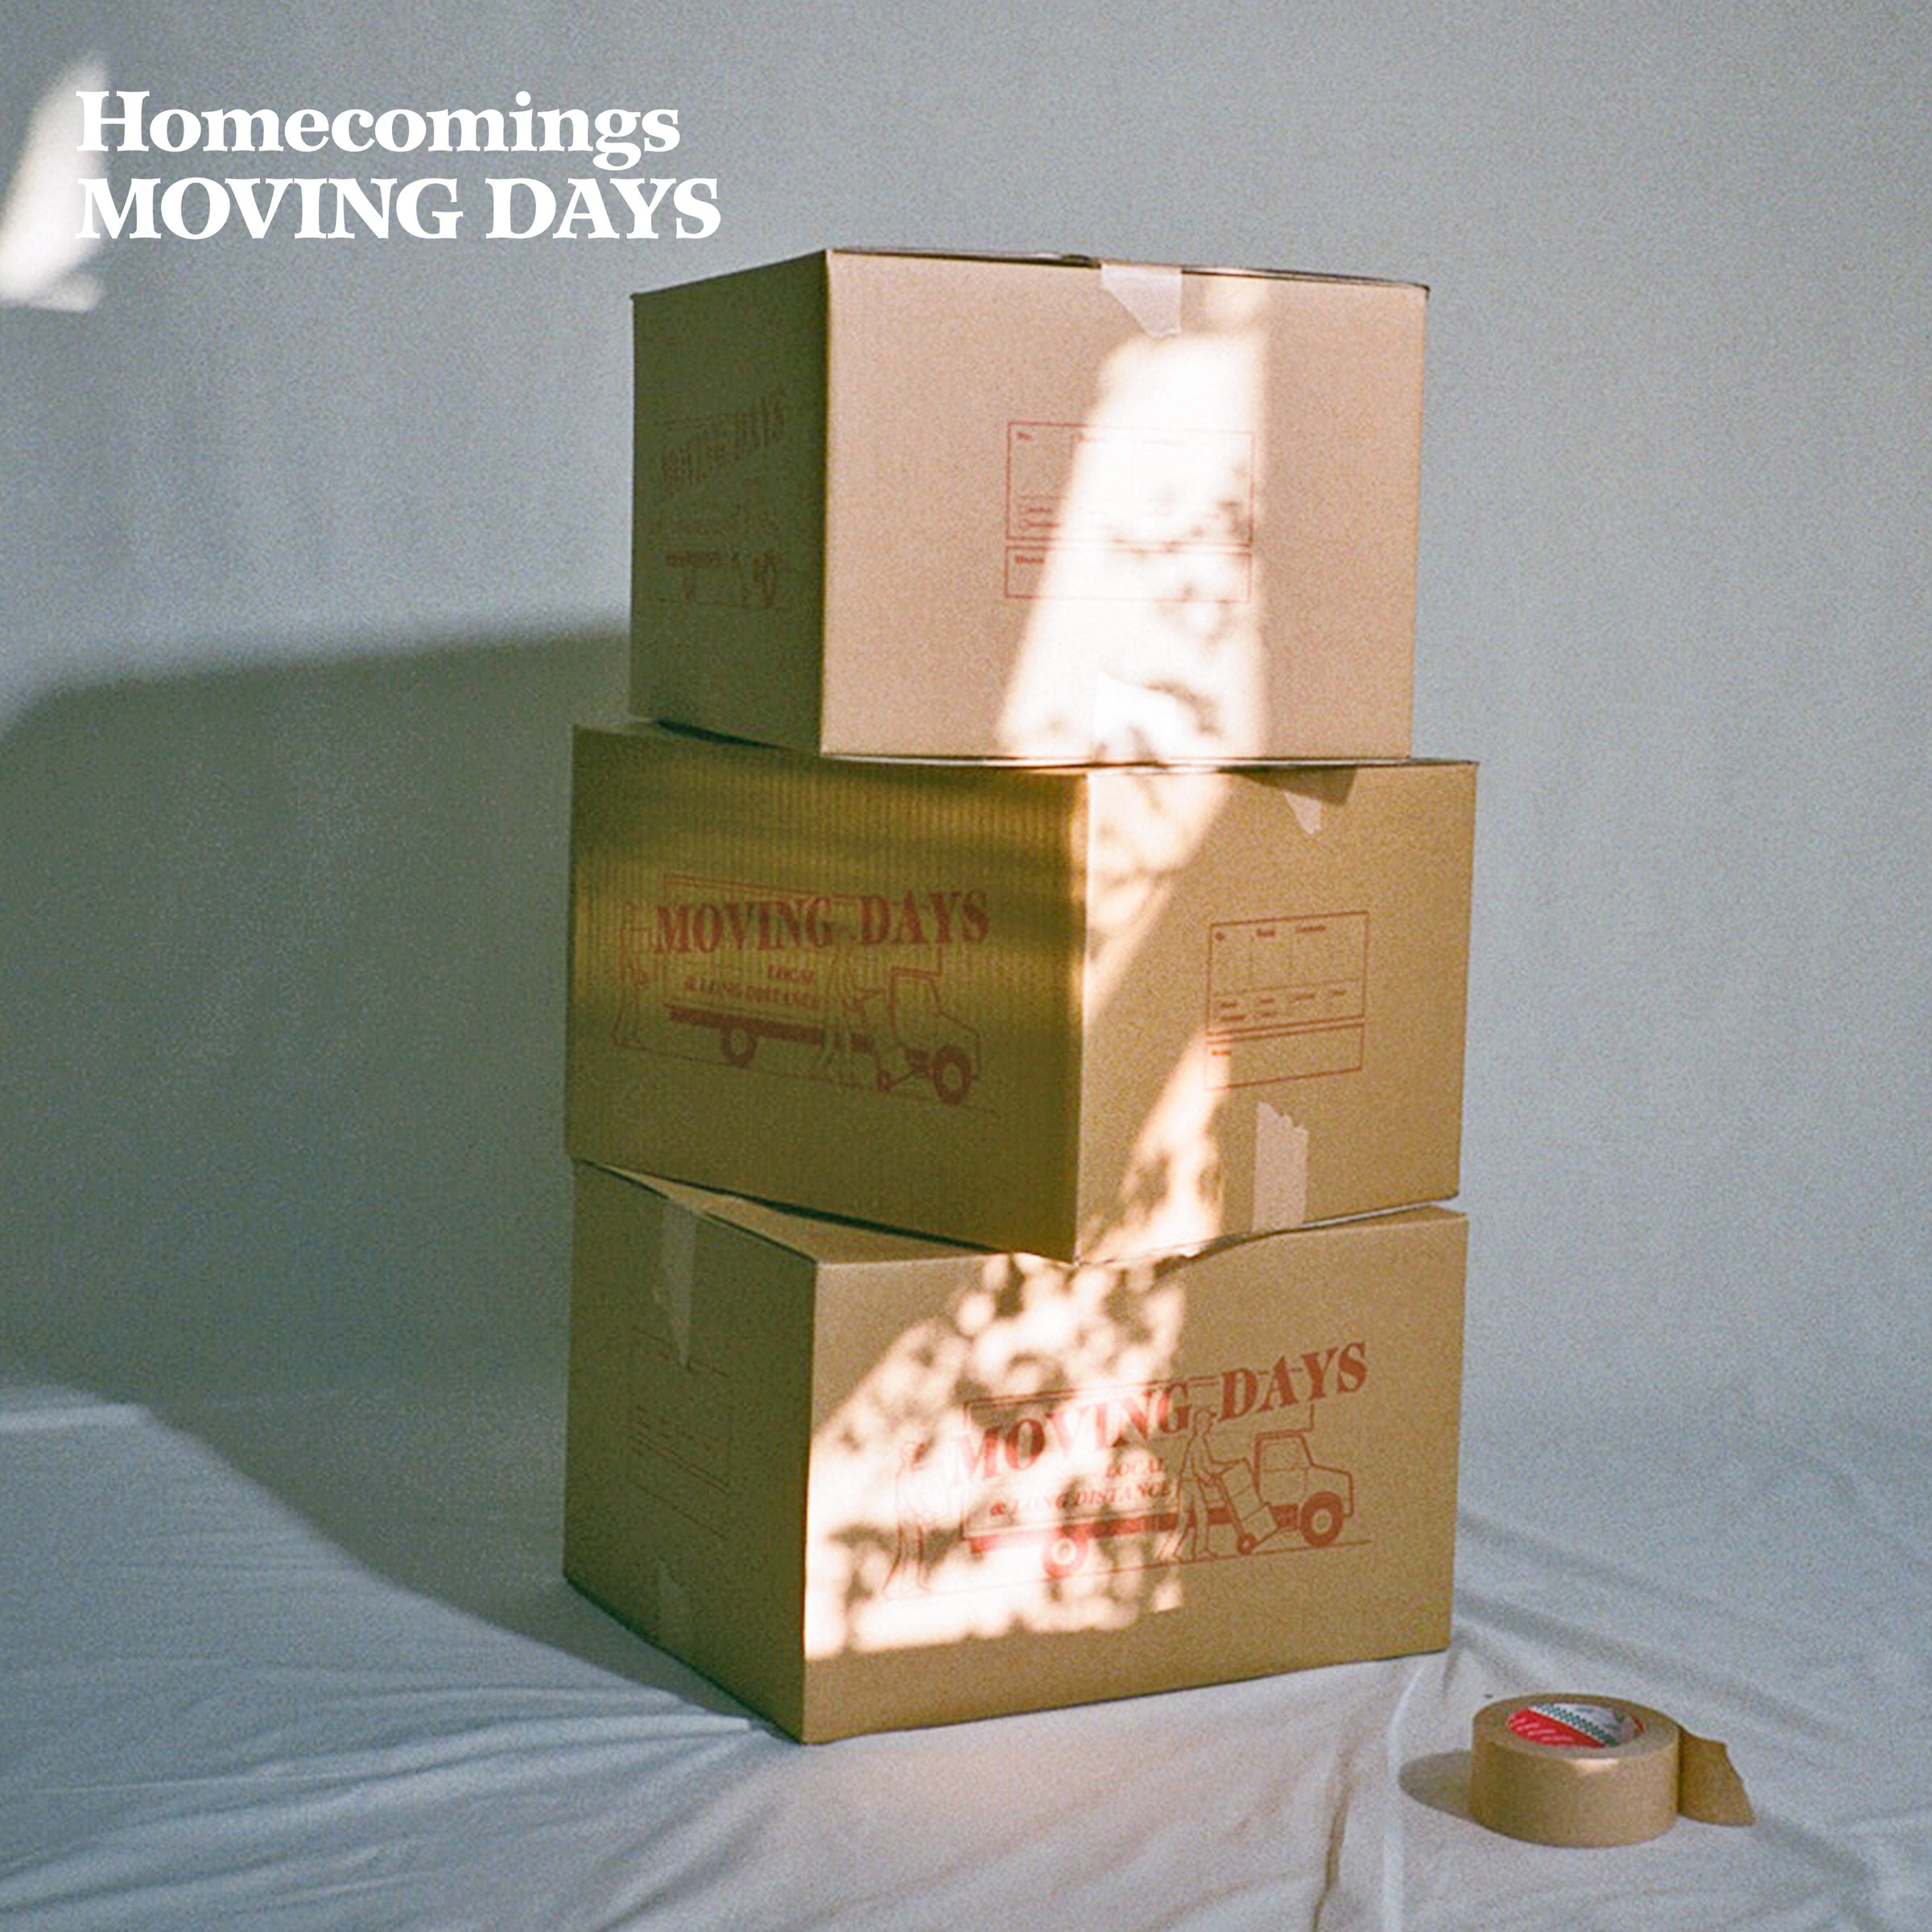 Homecomings – Moving Days (2021) [FLAC 24bit/96kHz]